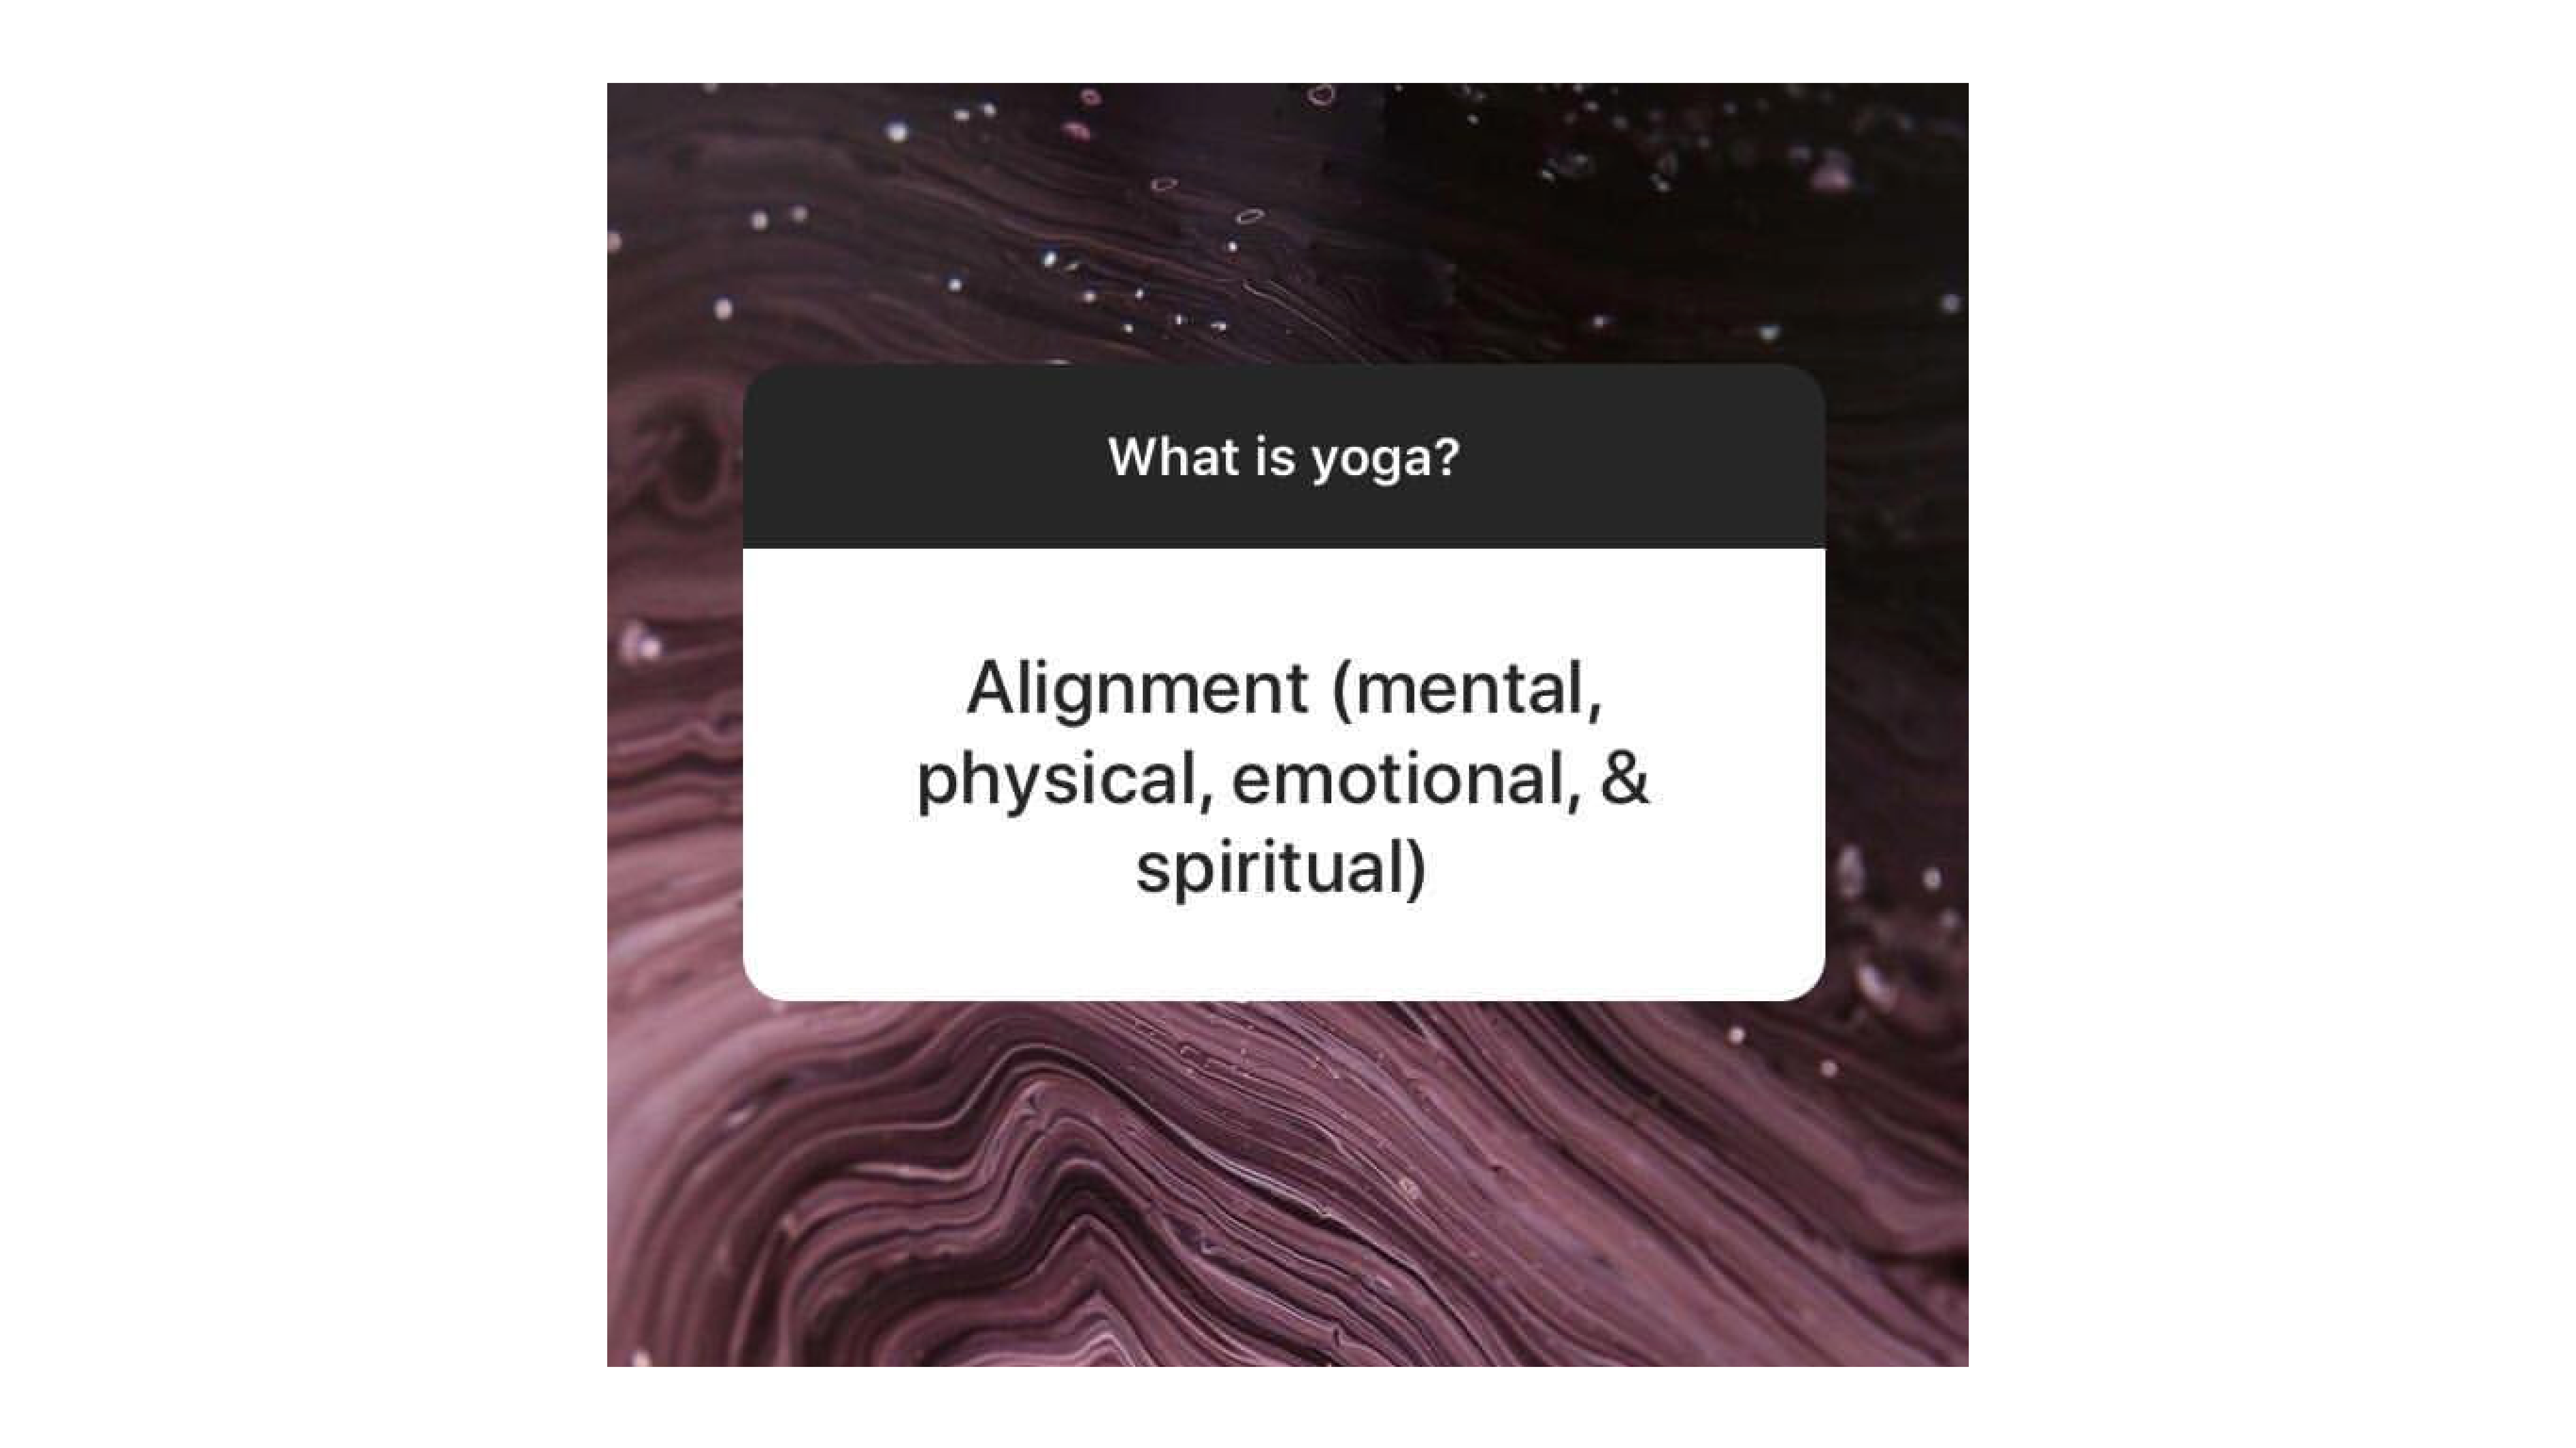 Text reads "What is Yoga" and "Alignment (mental, emotional, physical and spiritual" over an abstract background